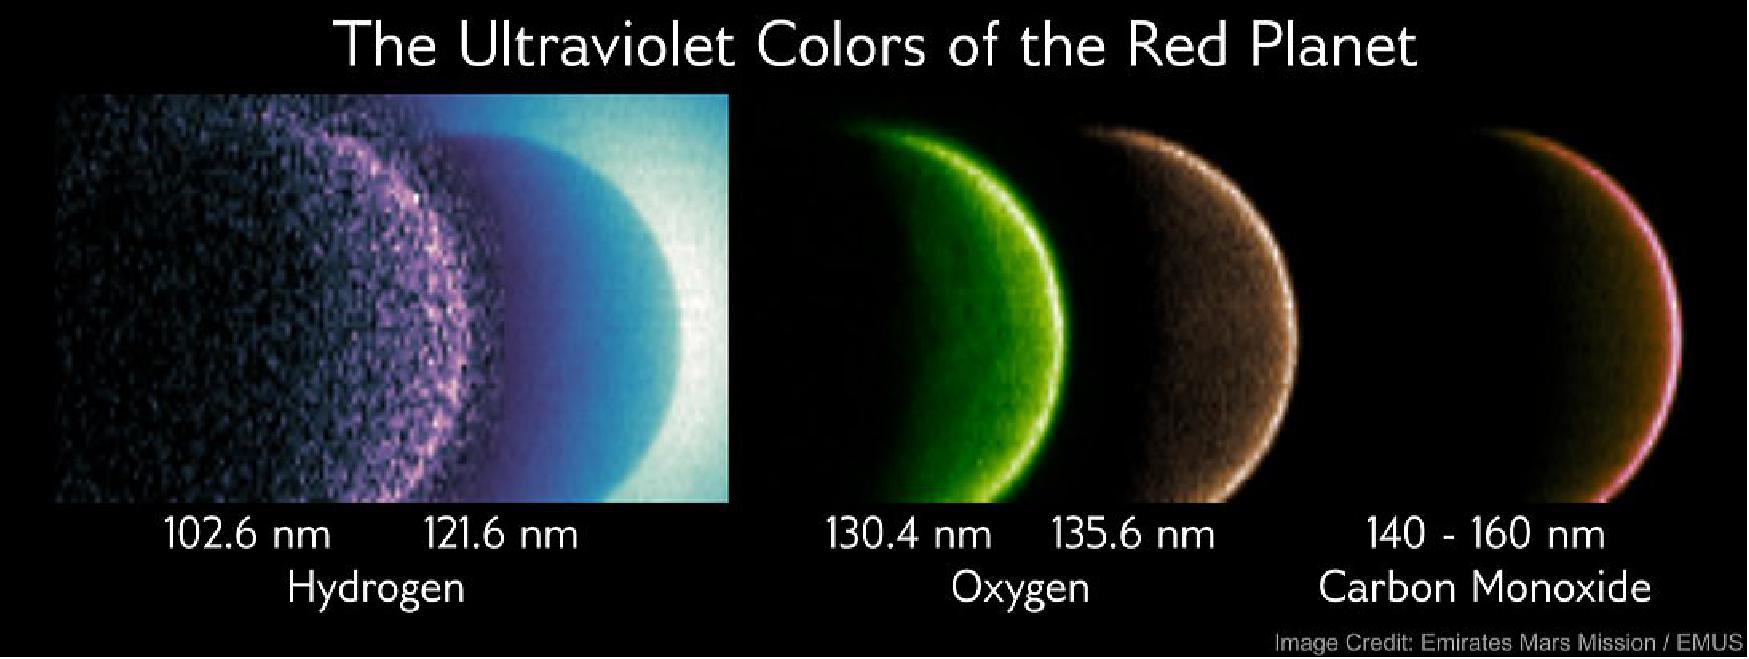 Figure 9: False-color images from the EMUS instrument. Violet (102.6 nm) and blue (121.6 nm) show the reflection of sunlight from the extended cloud of hydrogen atoms surrounding the planet. Green (130.4 nm) shows the reflection of sunlight from oxygen atoms in the upper atmosphere. Orange (135.6 nm) shows energetic electrons causing other oxygen atoms to glow, similar to a fluorescent lamp. Red (140-160 nm) shows a combination of emissions coming from carbon monoxide molecules (image credit: Emirates Mars Mission / EMUS)